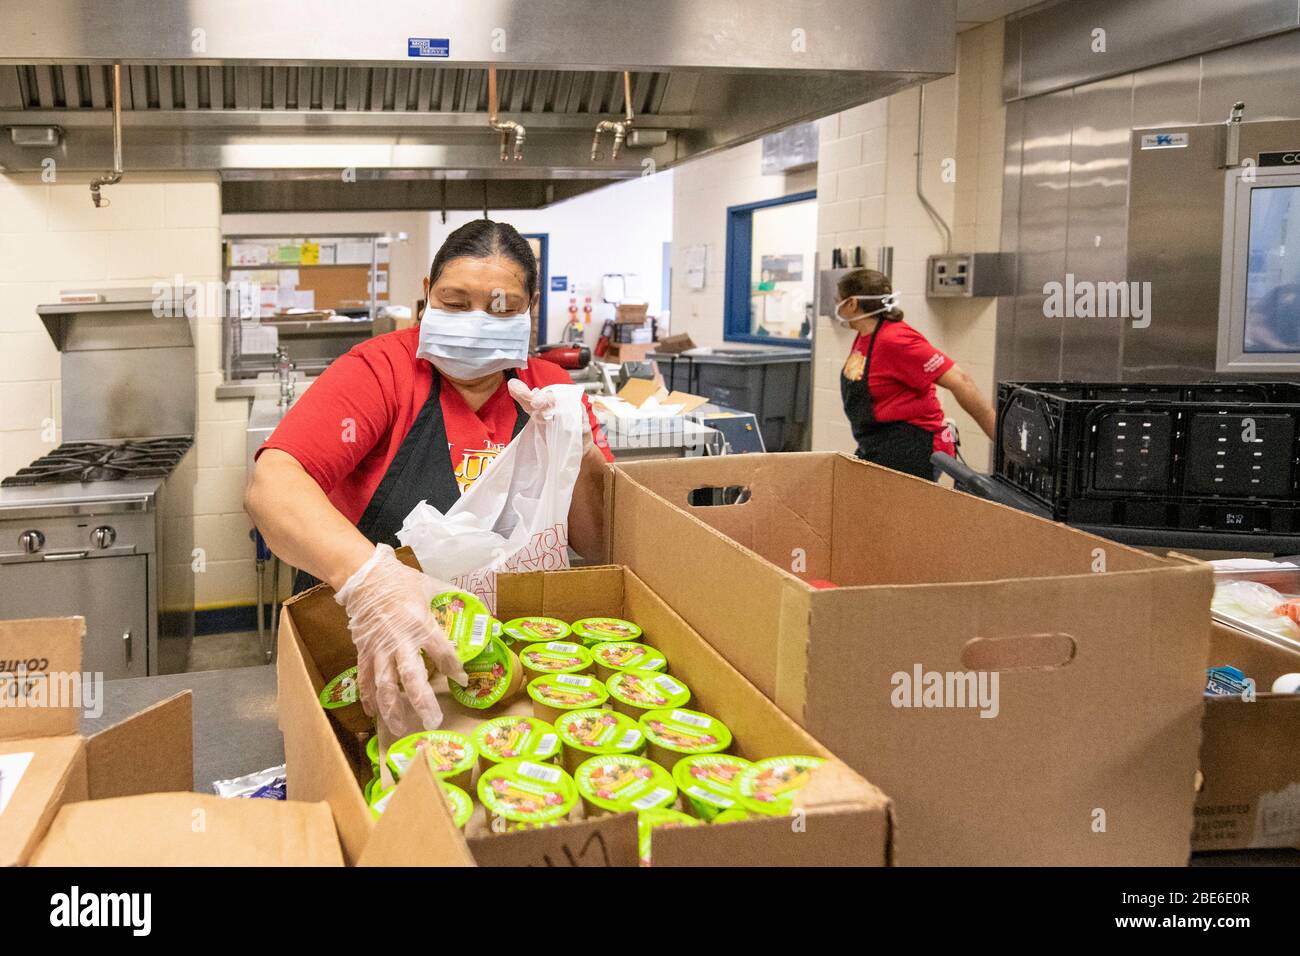 Child Nutrition Staff pack meal bags for families suffering from the COVID-19, coronavirus pandemic April 8, 2020 in San Antonio, Texas. The USDA Food and Nutrition Service is  distributing meals for school children at locations across the country. Stock Photo